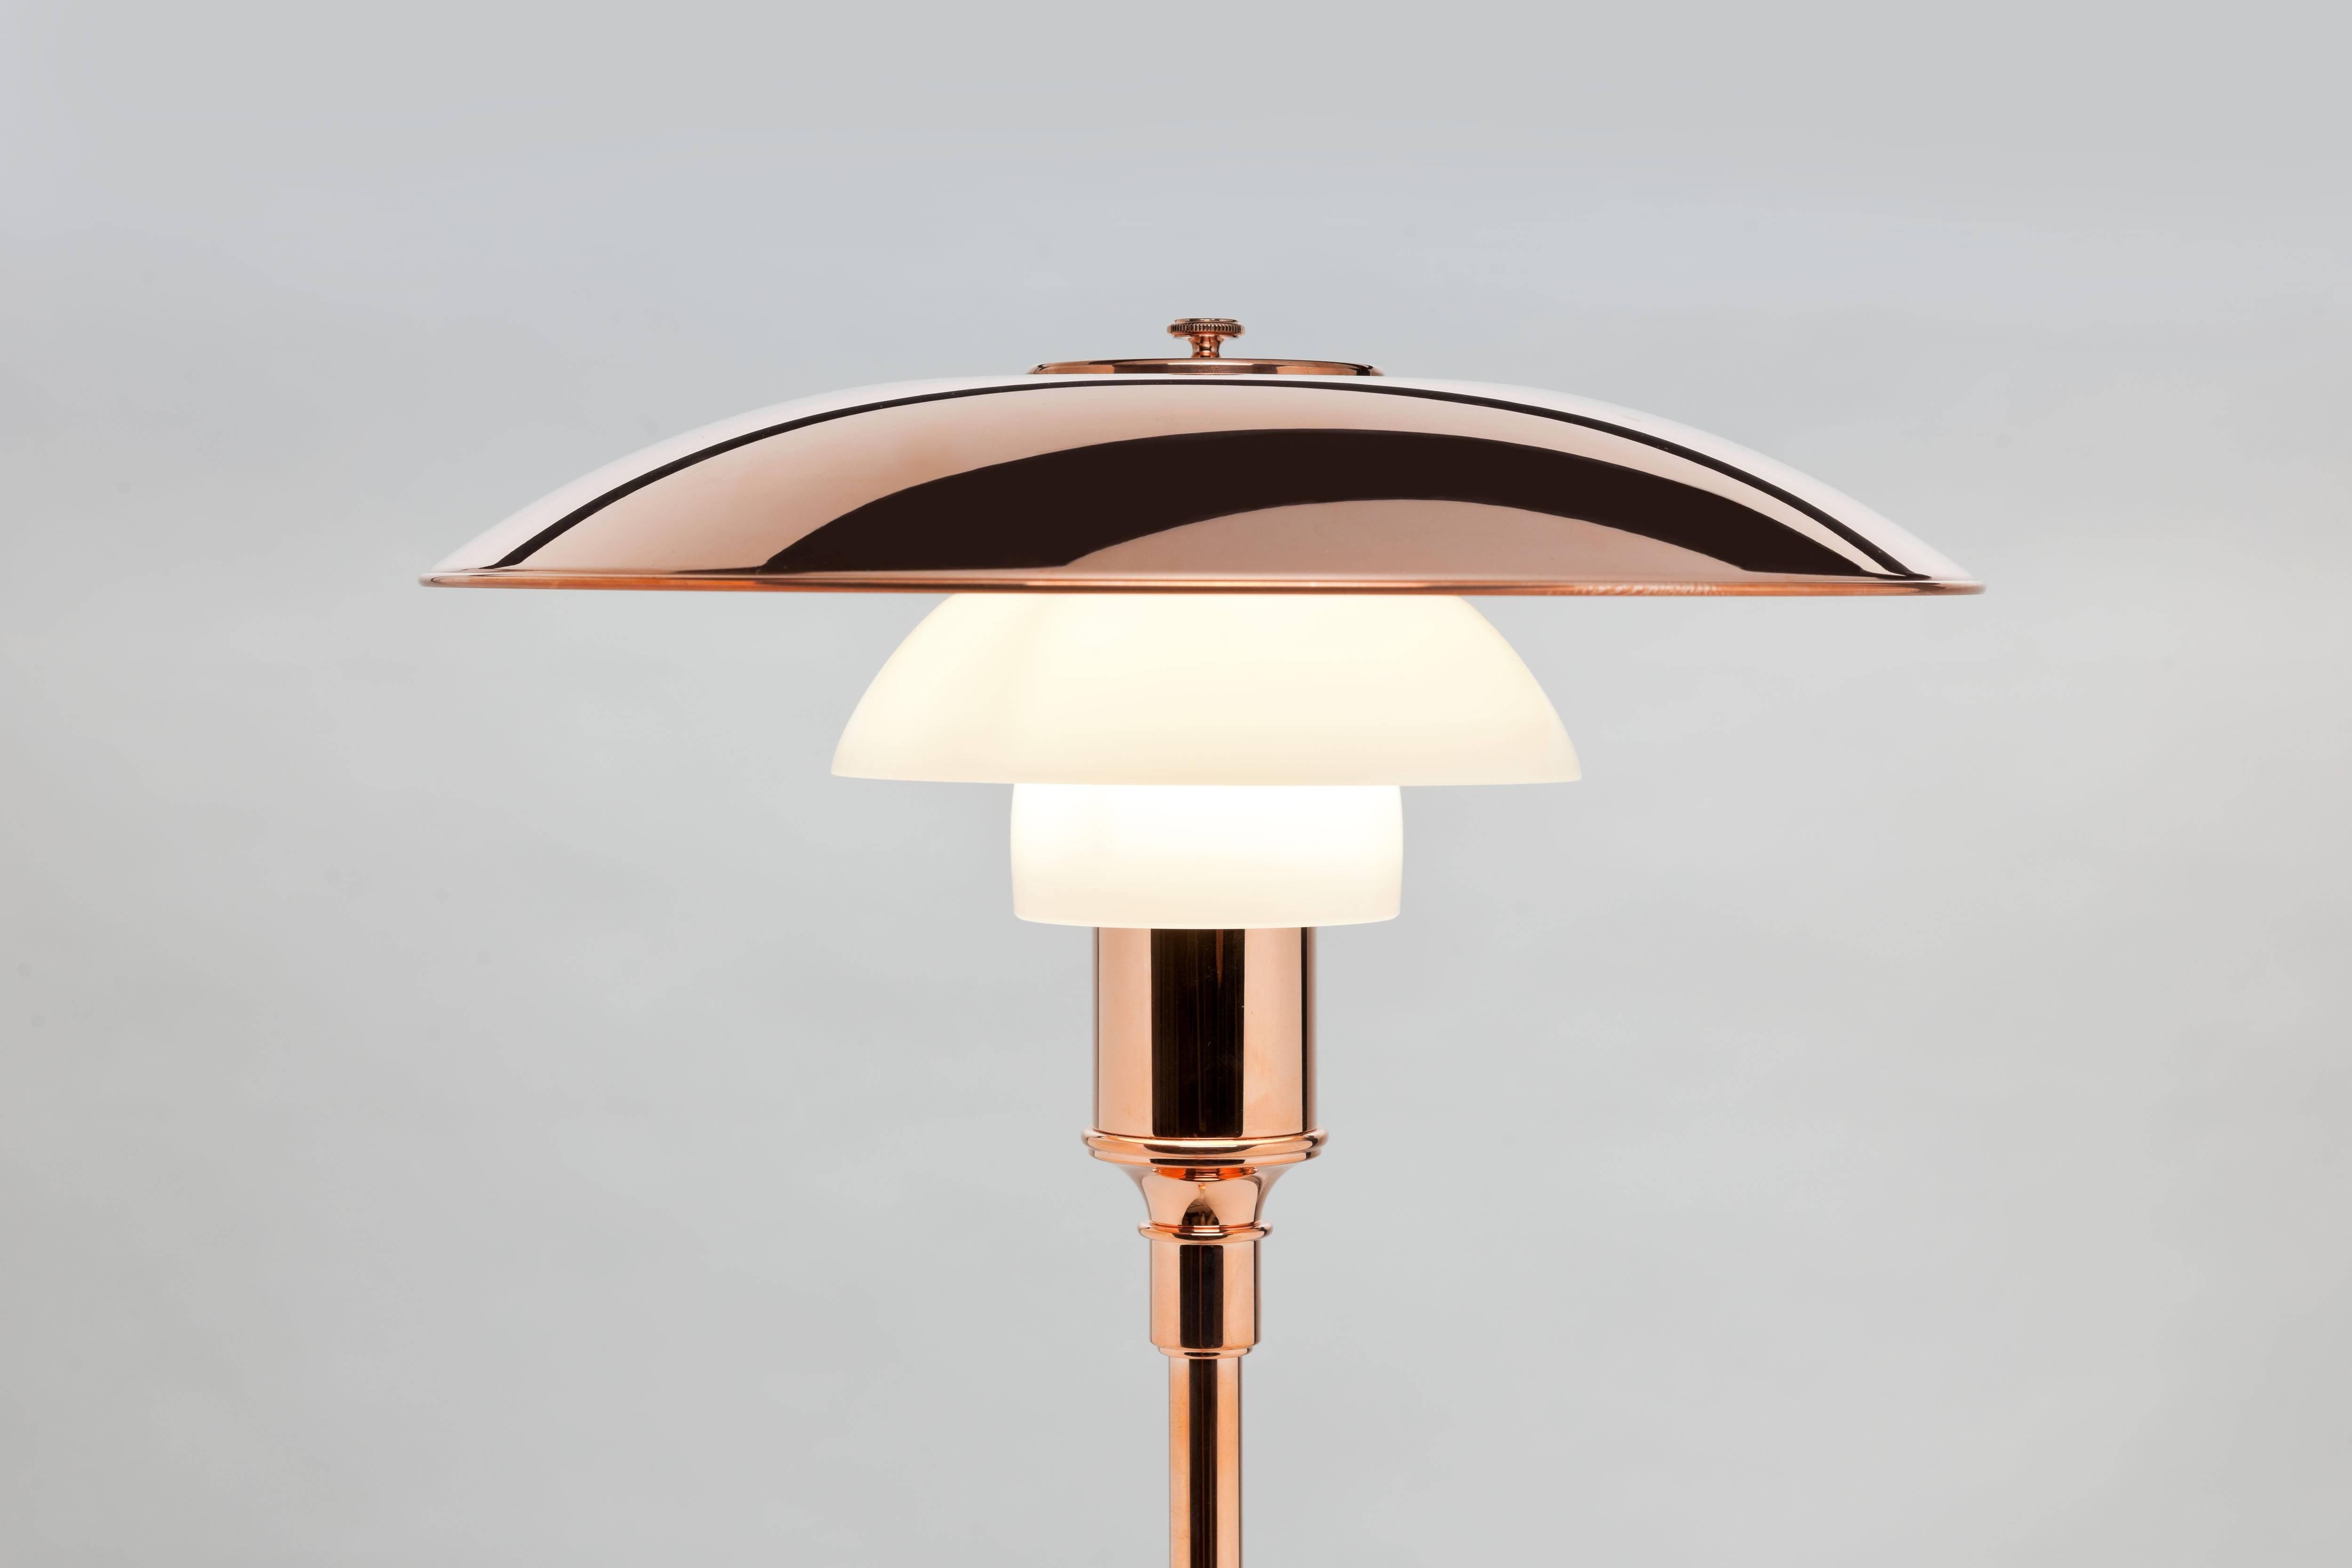 Stunning limited edition copper and glass version of the legendary PH 3½-2½ lamp series, originally designed in 1928 and back then only produced for approximately two years. This reissue was launched in 2016 and was only available for a very brief